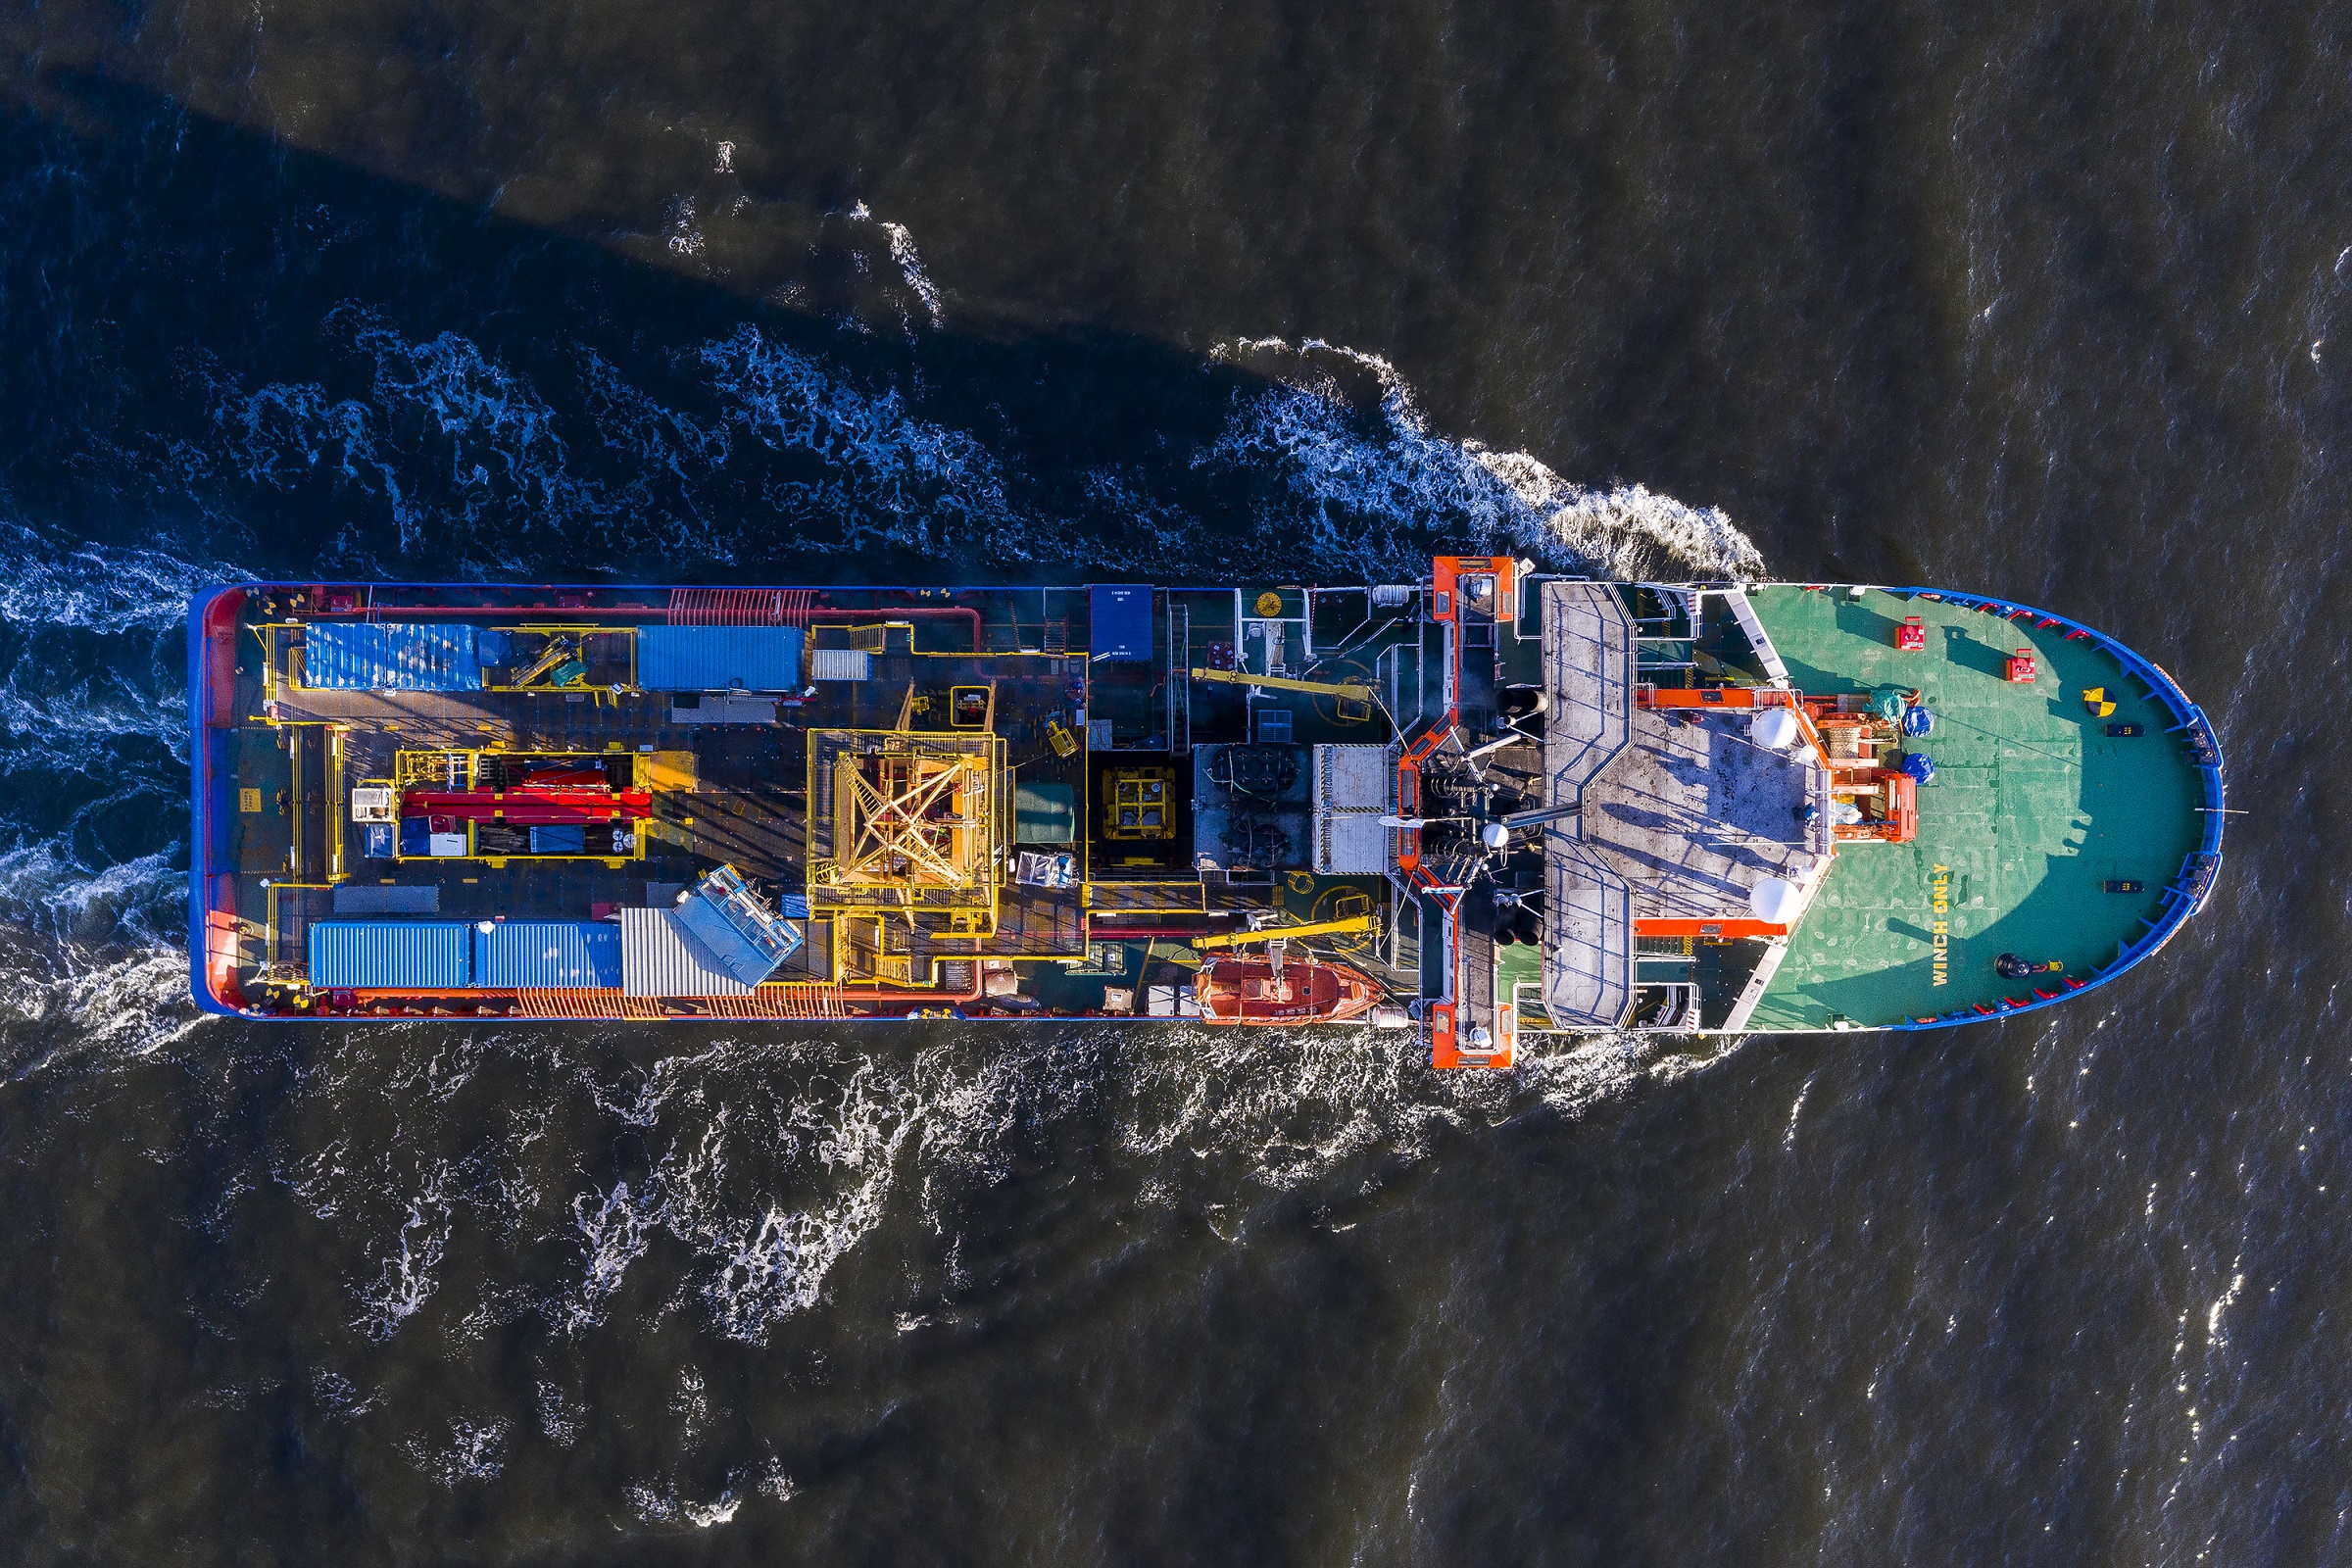 Inmarsat Fleet Xpress enables Geoquip marine vessels to offer high-speed private networks to charterers and crew at sea